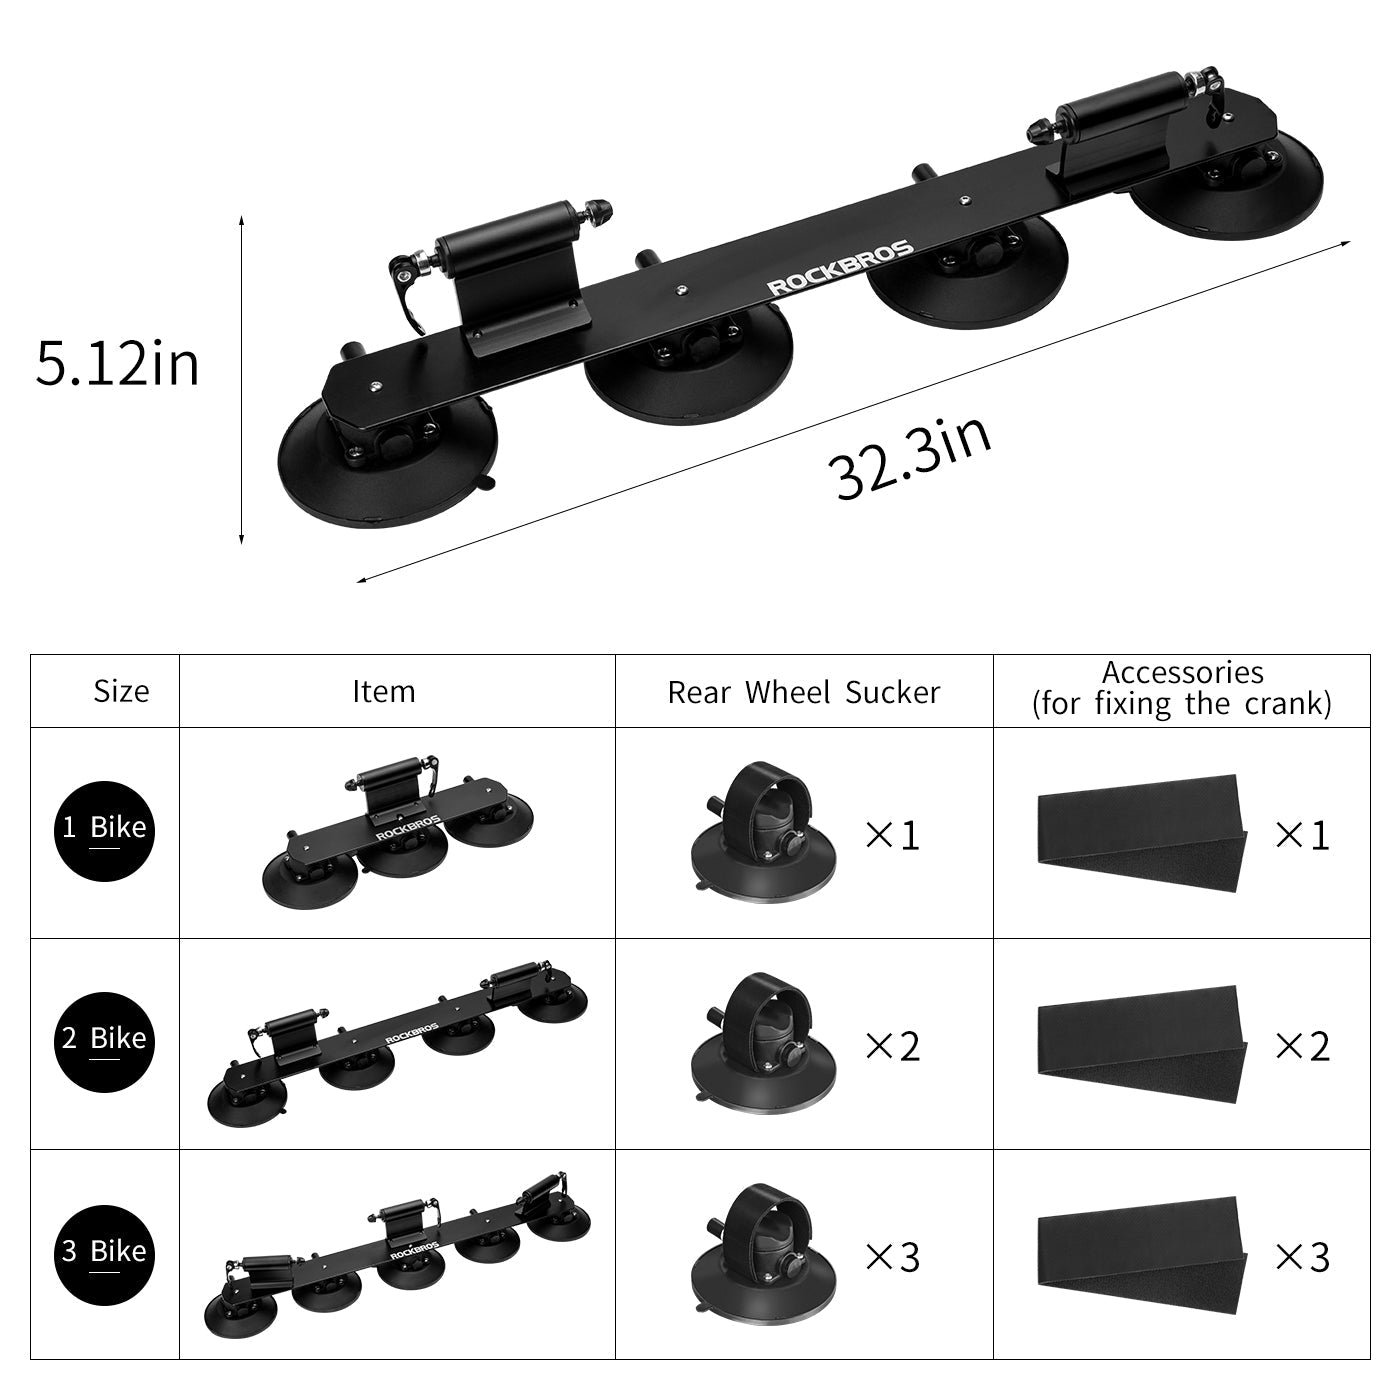 ROCKBROS Suction Cup Car Roof Rack for 2 Bikes - Black